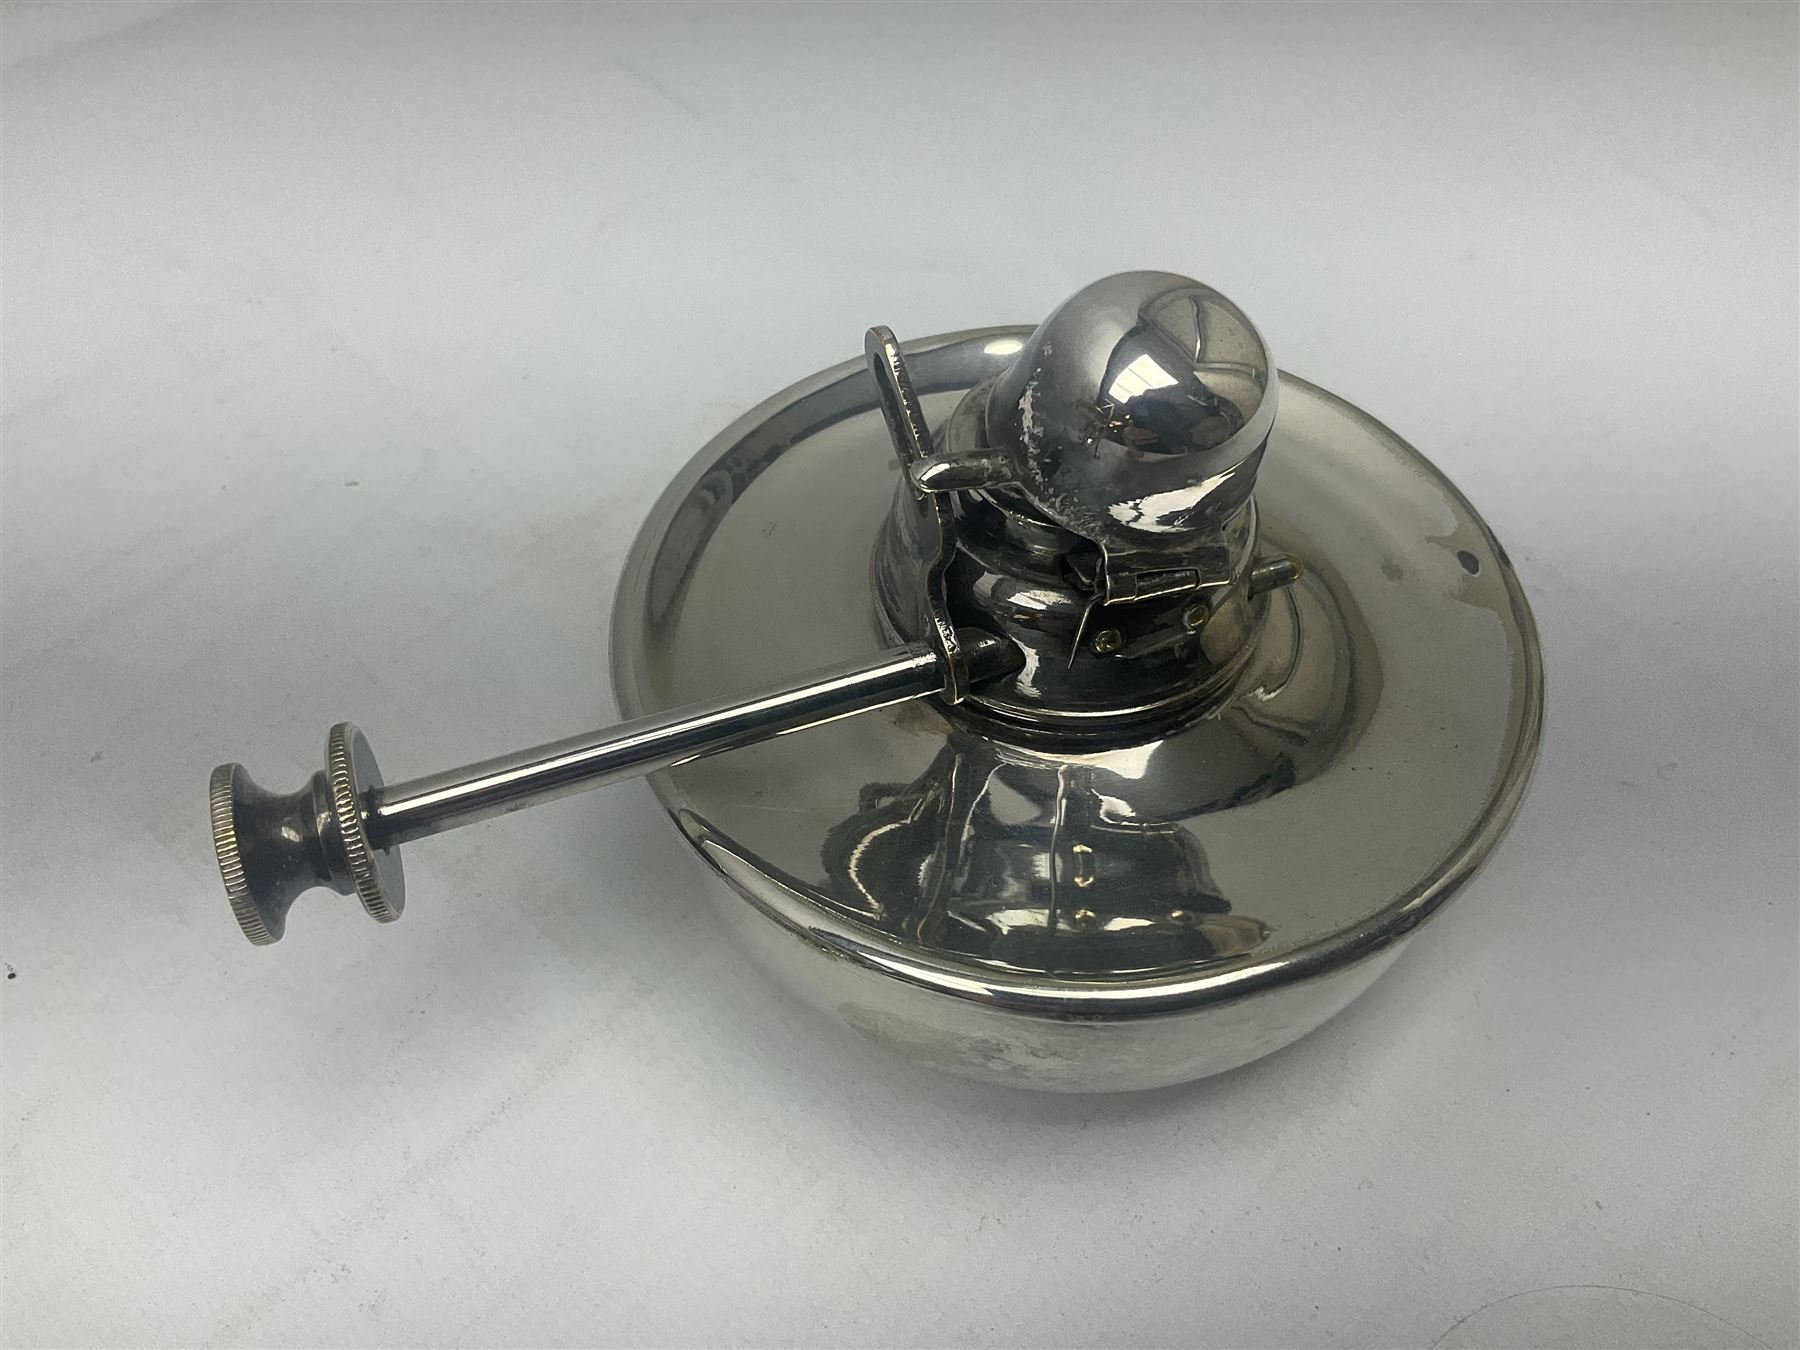 Walker & Hall silver plated long handled chafing dish - Image 14 of 18